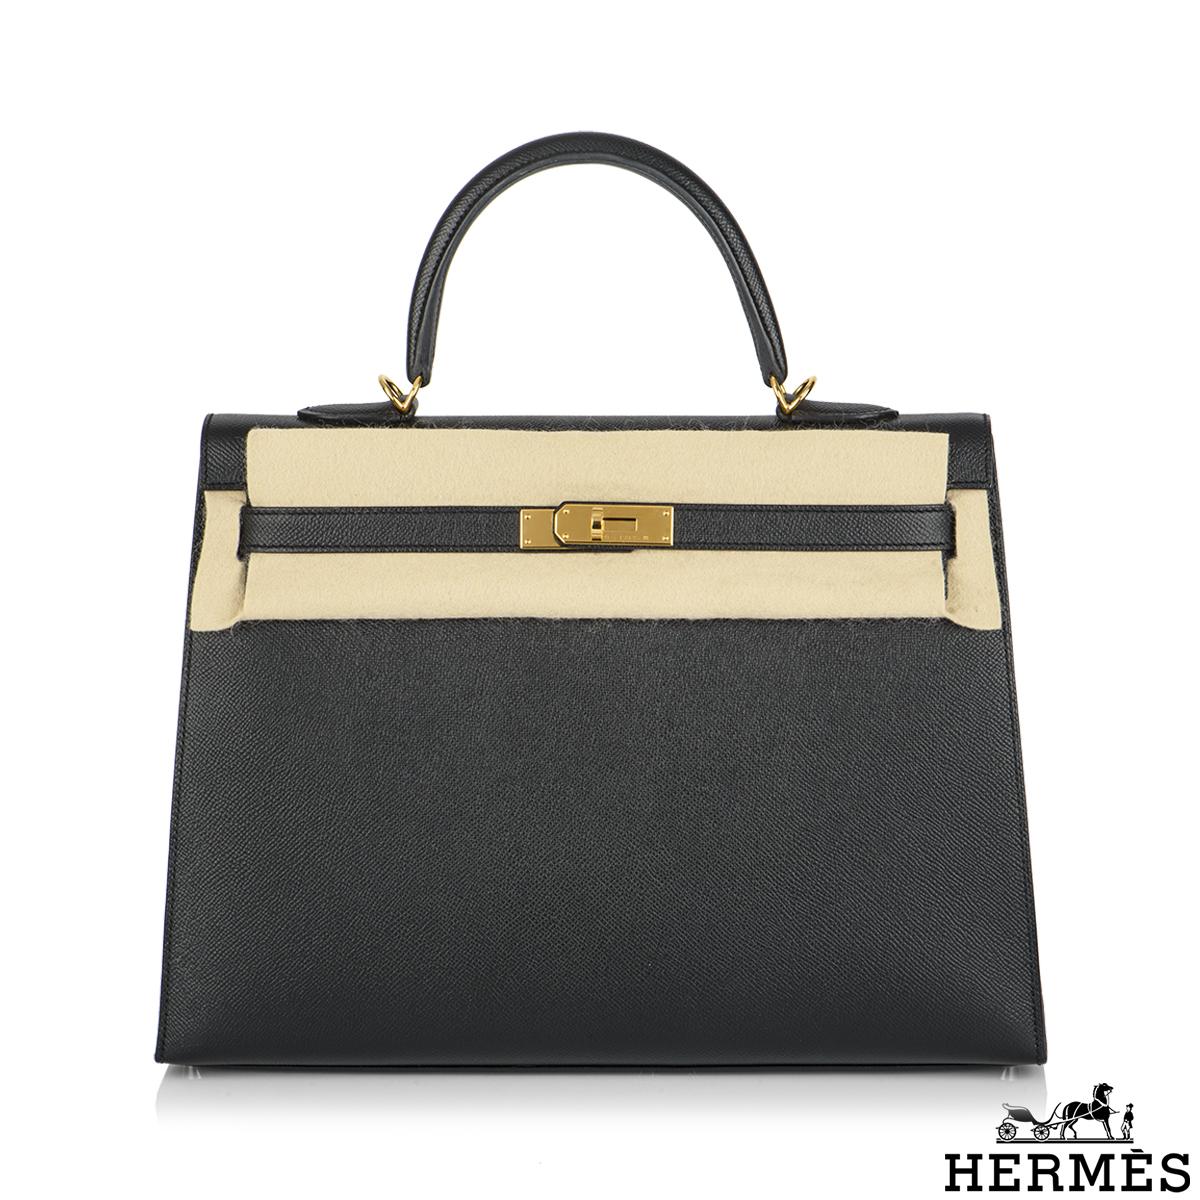 Hermès Special Order Kelly Sellier 35cm Noir Veau Epsom GHW In Excellent Condition For Sale In London, GB